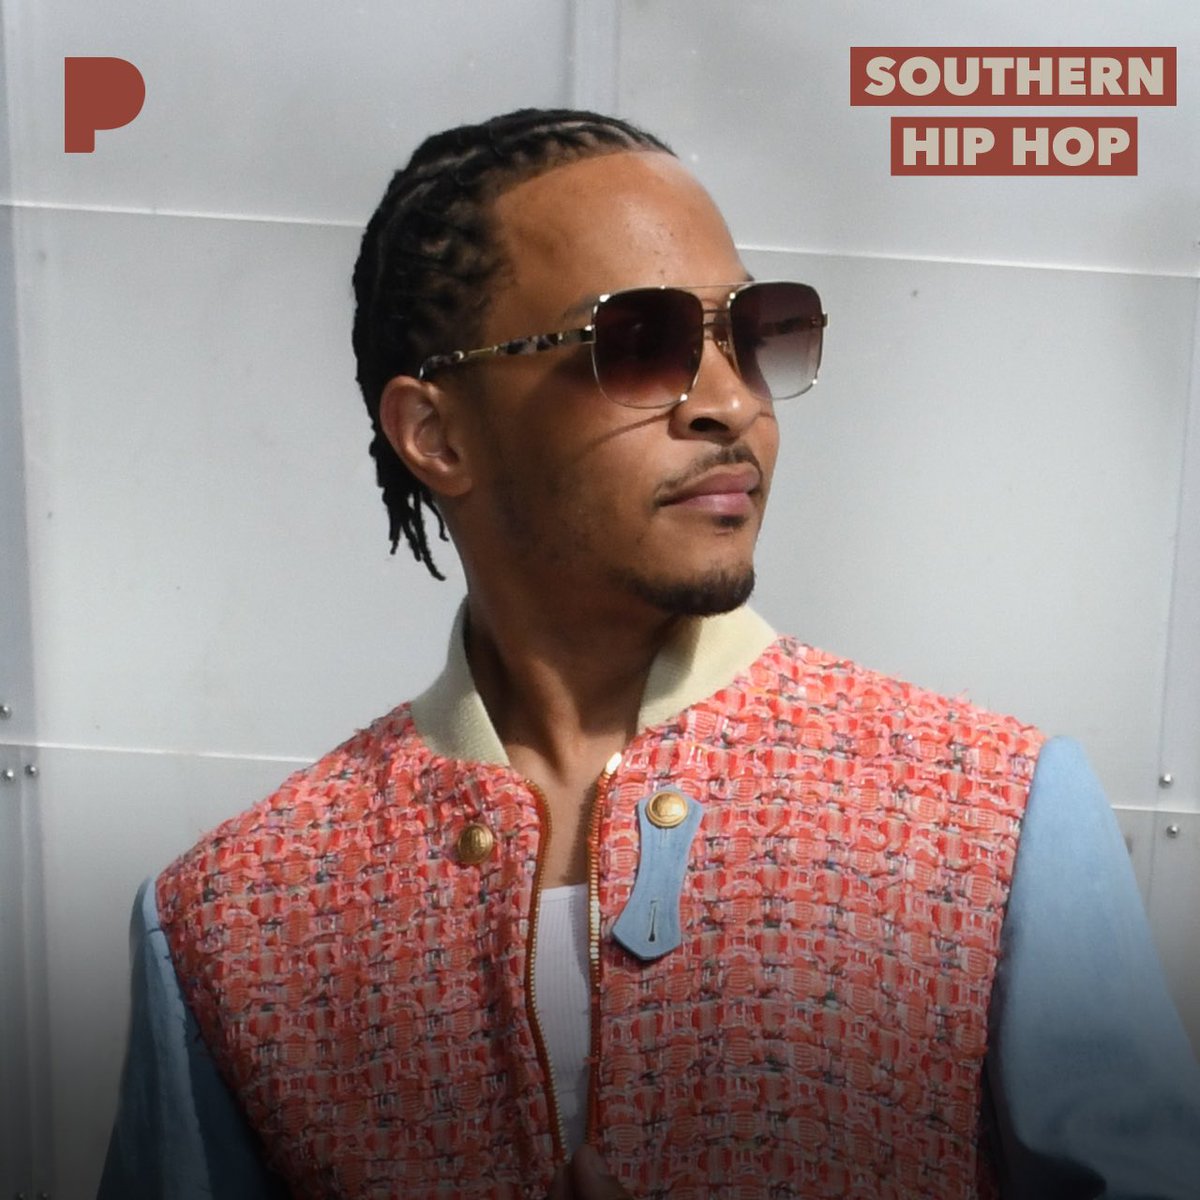 Luv 2 my patnas over at @pandoramusic for making yours truly da cover of their Southern Hip Hop Playlist #VACAY 🇿🇦🫡👑🛩️🏝️ Listen here: pandora.app.link/j93HilfXqEb